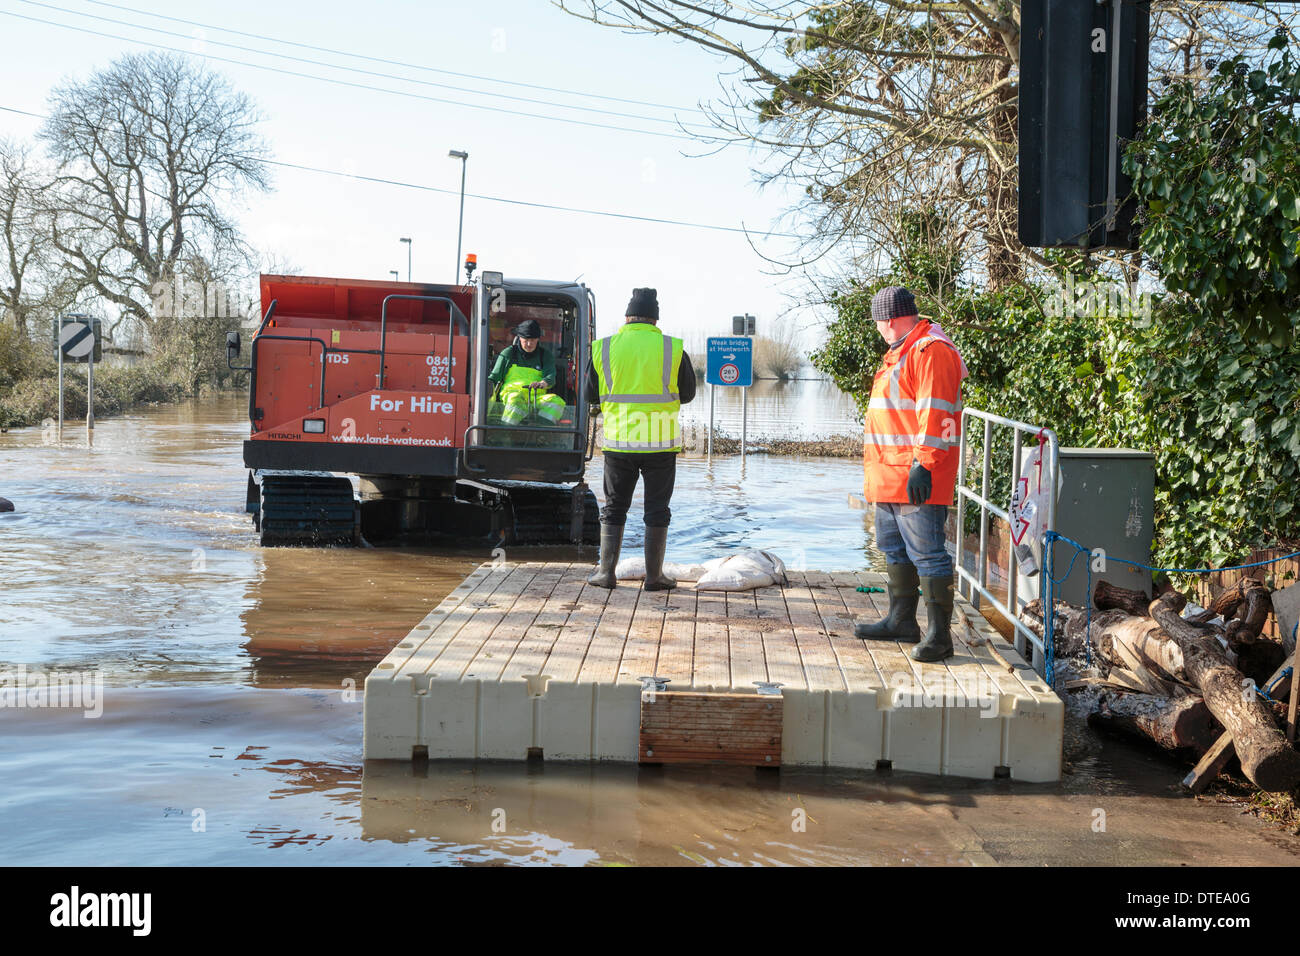 Burrowbridge, UK. 16th Feb, 2014. Workers make use of specialised vehicles during the heavy flooding at Burrowbridge on the Somerset Levels on February 16, 2014. Vehicles suitable for use in deep water are being used to remove obstacles such as tree trunks and telegraph poles from the water so that aid can be distributed to local residents. The A361 is a major arterial route across the Somerset Levels and has just experienced the worst flooding in living history and has been underwater now for seven weeks. Credit:  Nick Cable/Alamy Live News Stock Photo